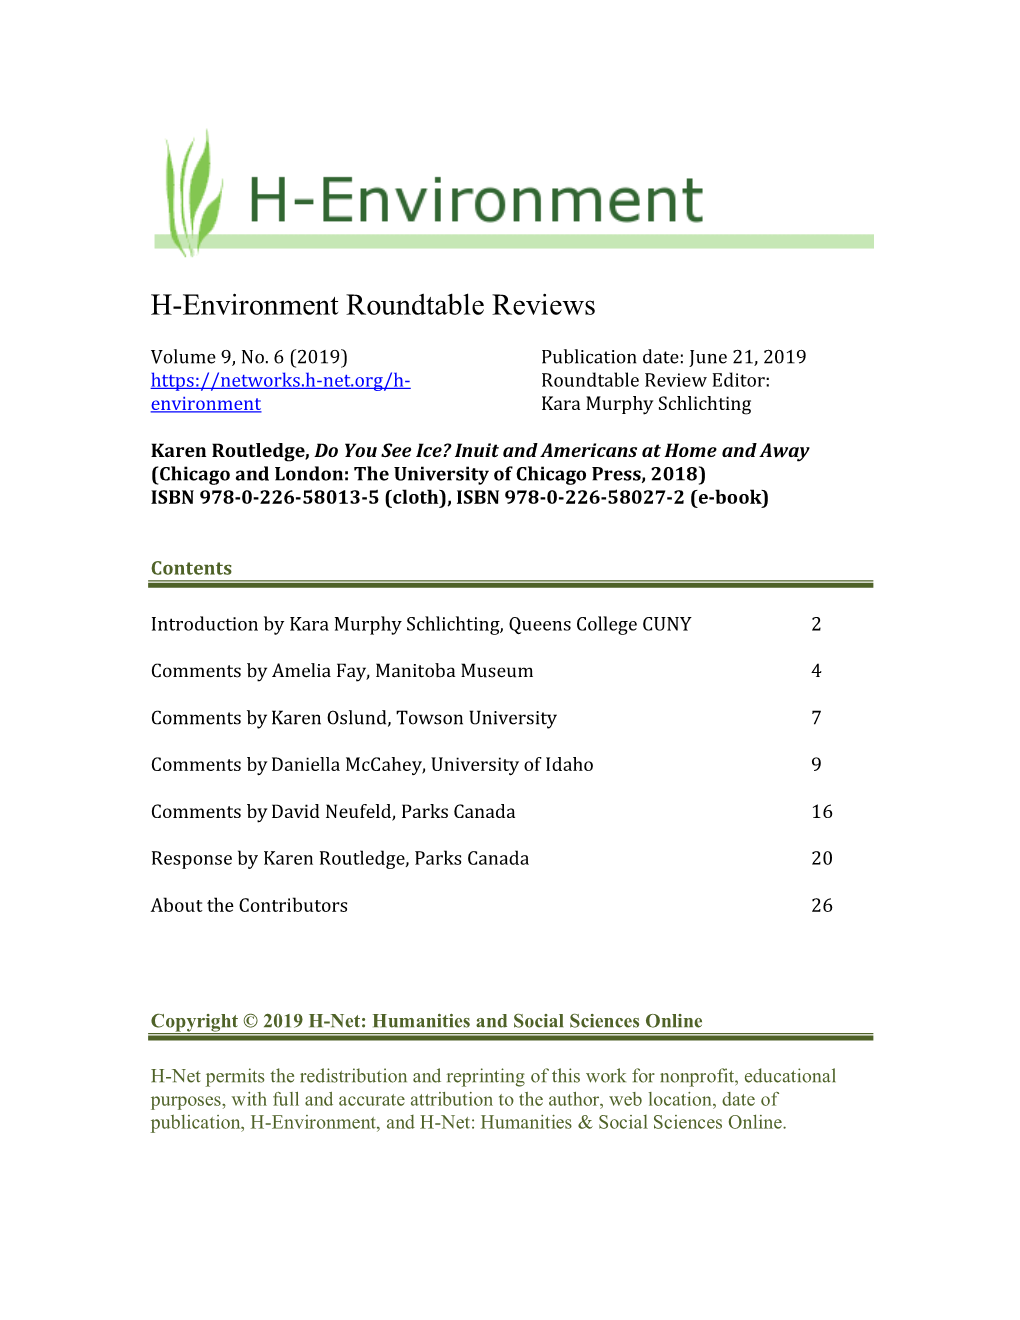 H-Environment Roundtable Reviews